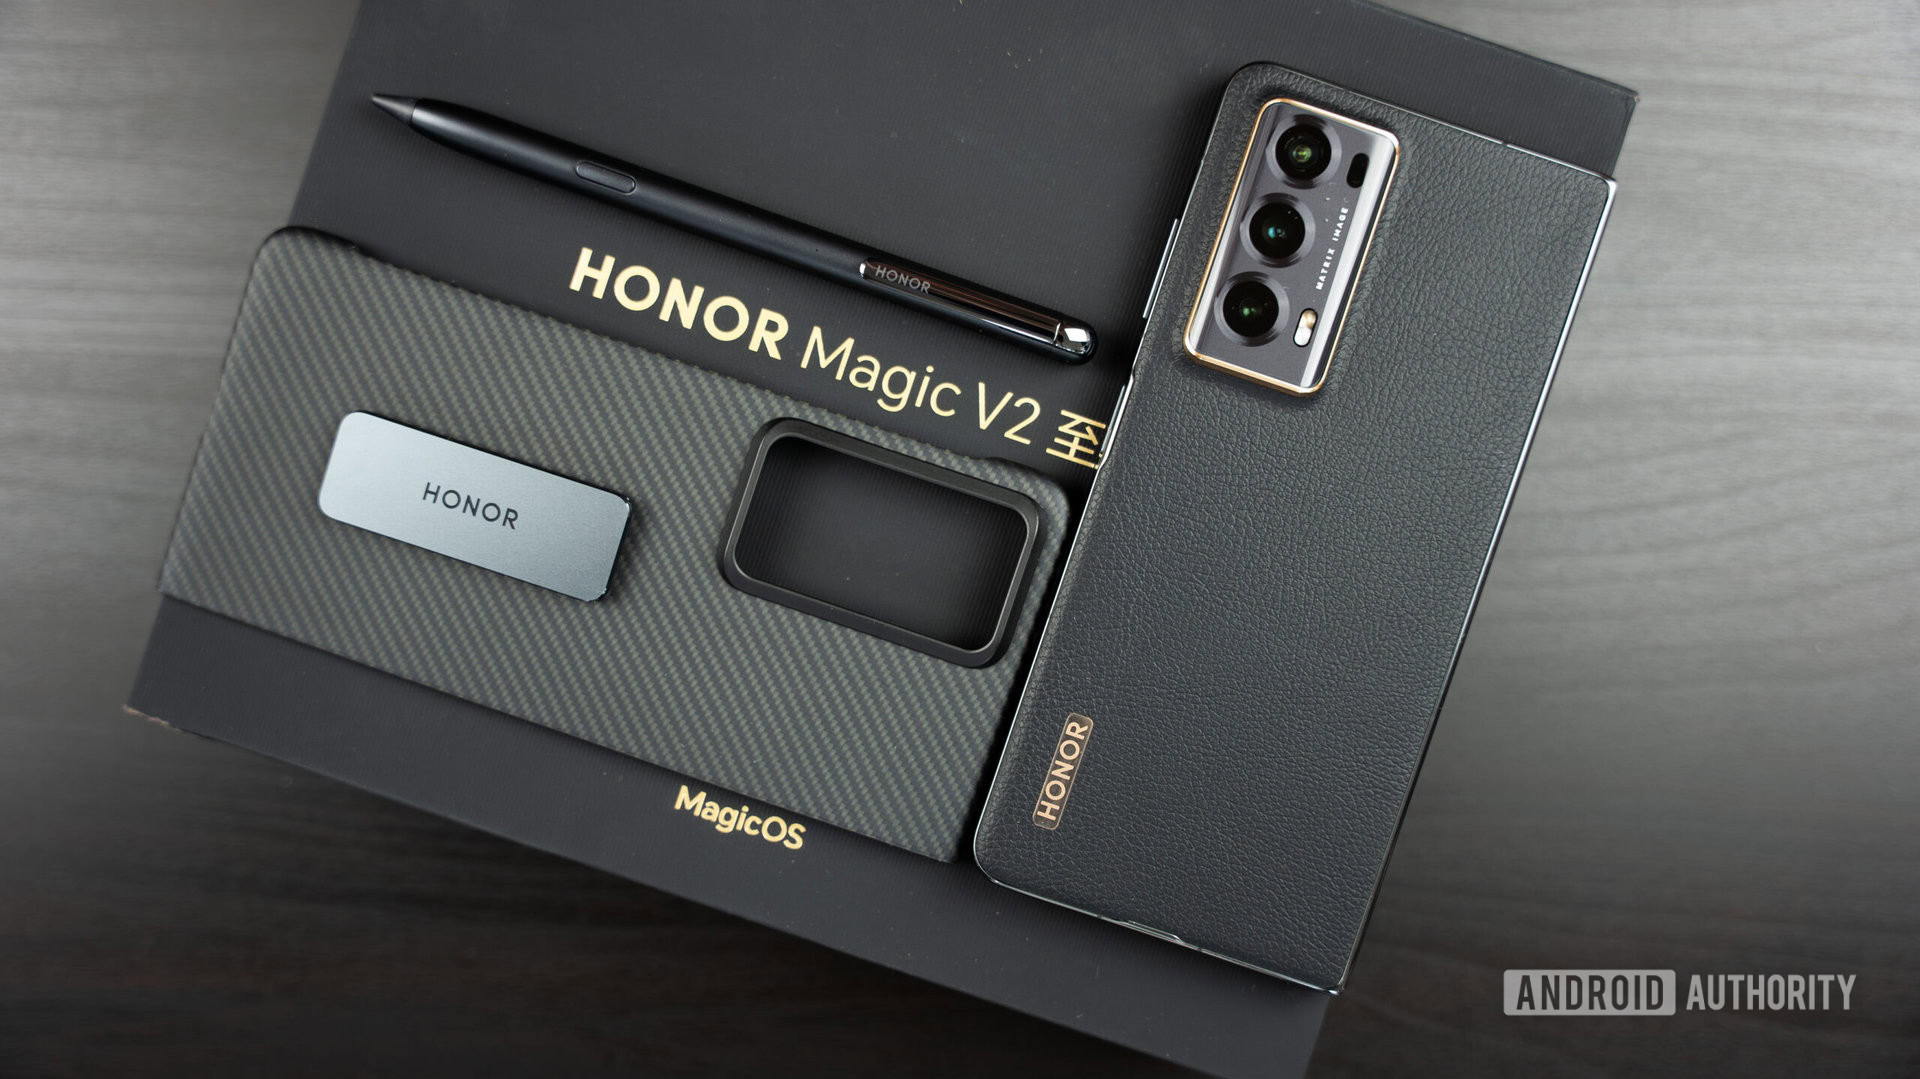 The Honor Magic V2 European release will come faster than the Magic Vs' -   news